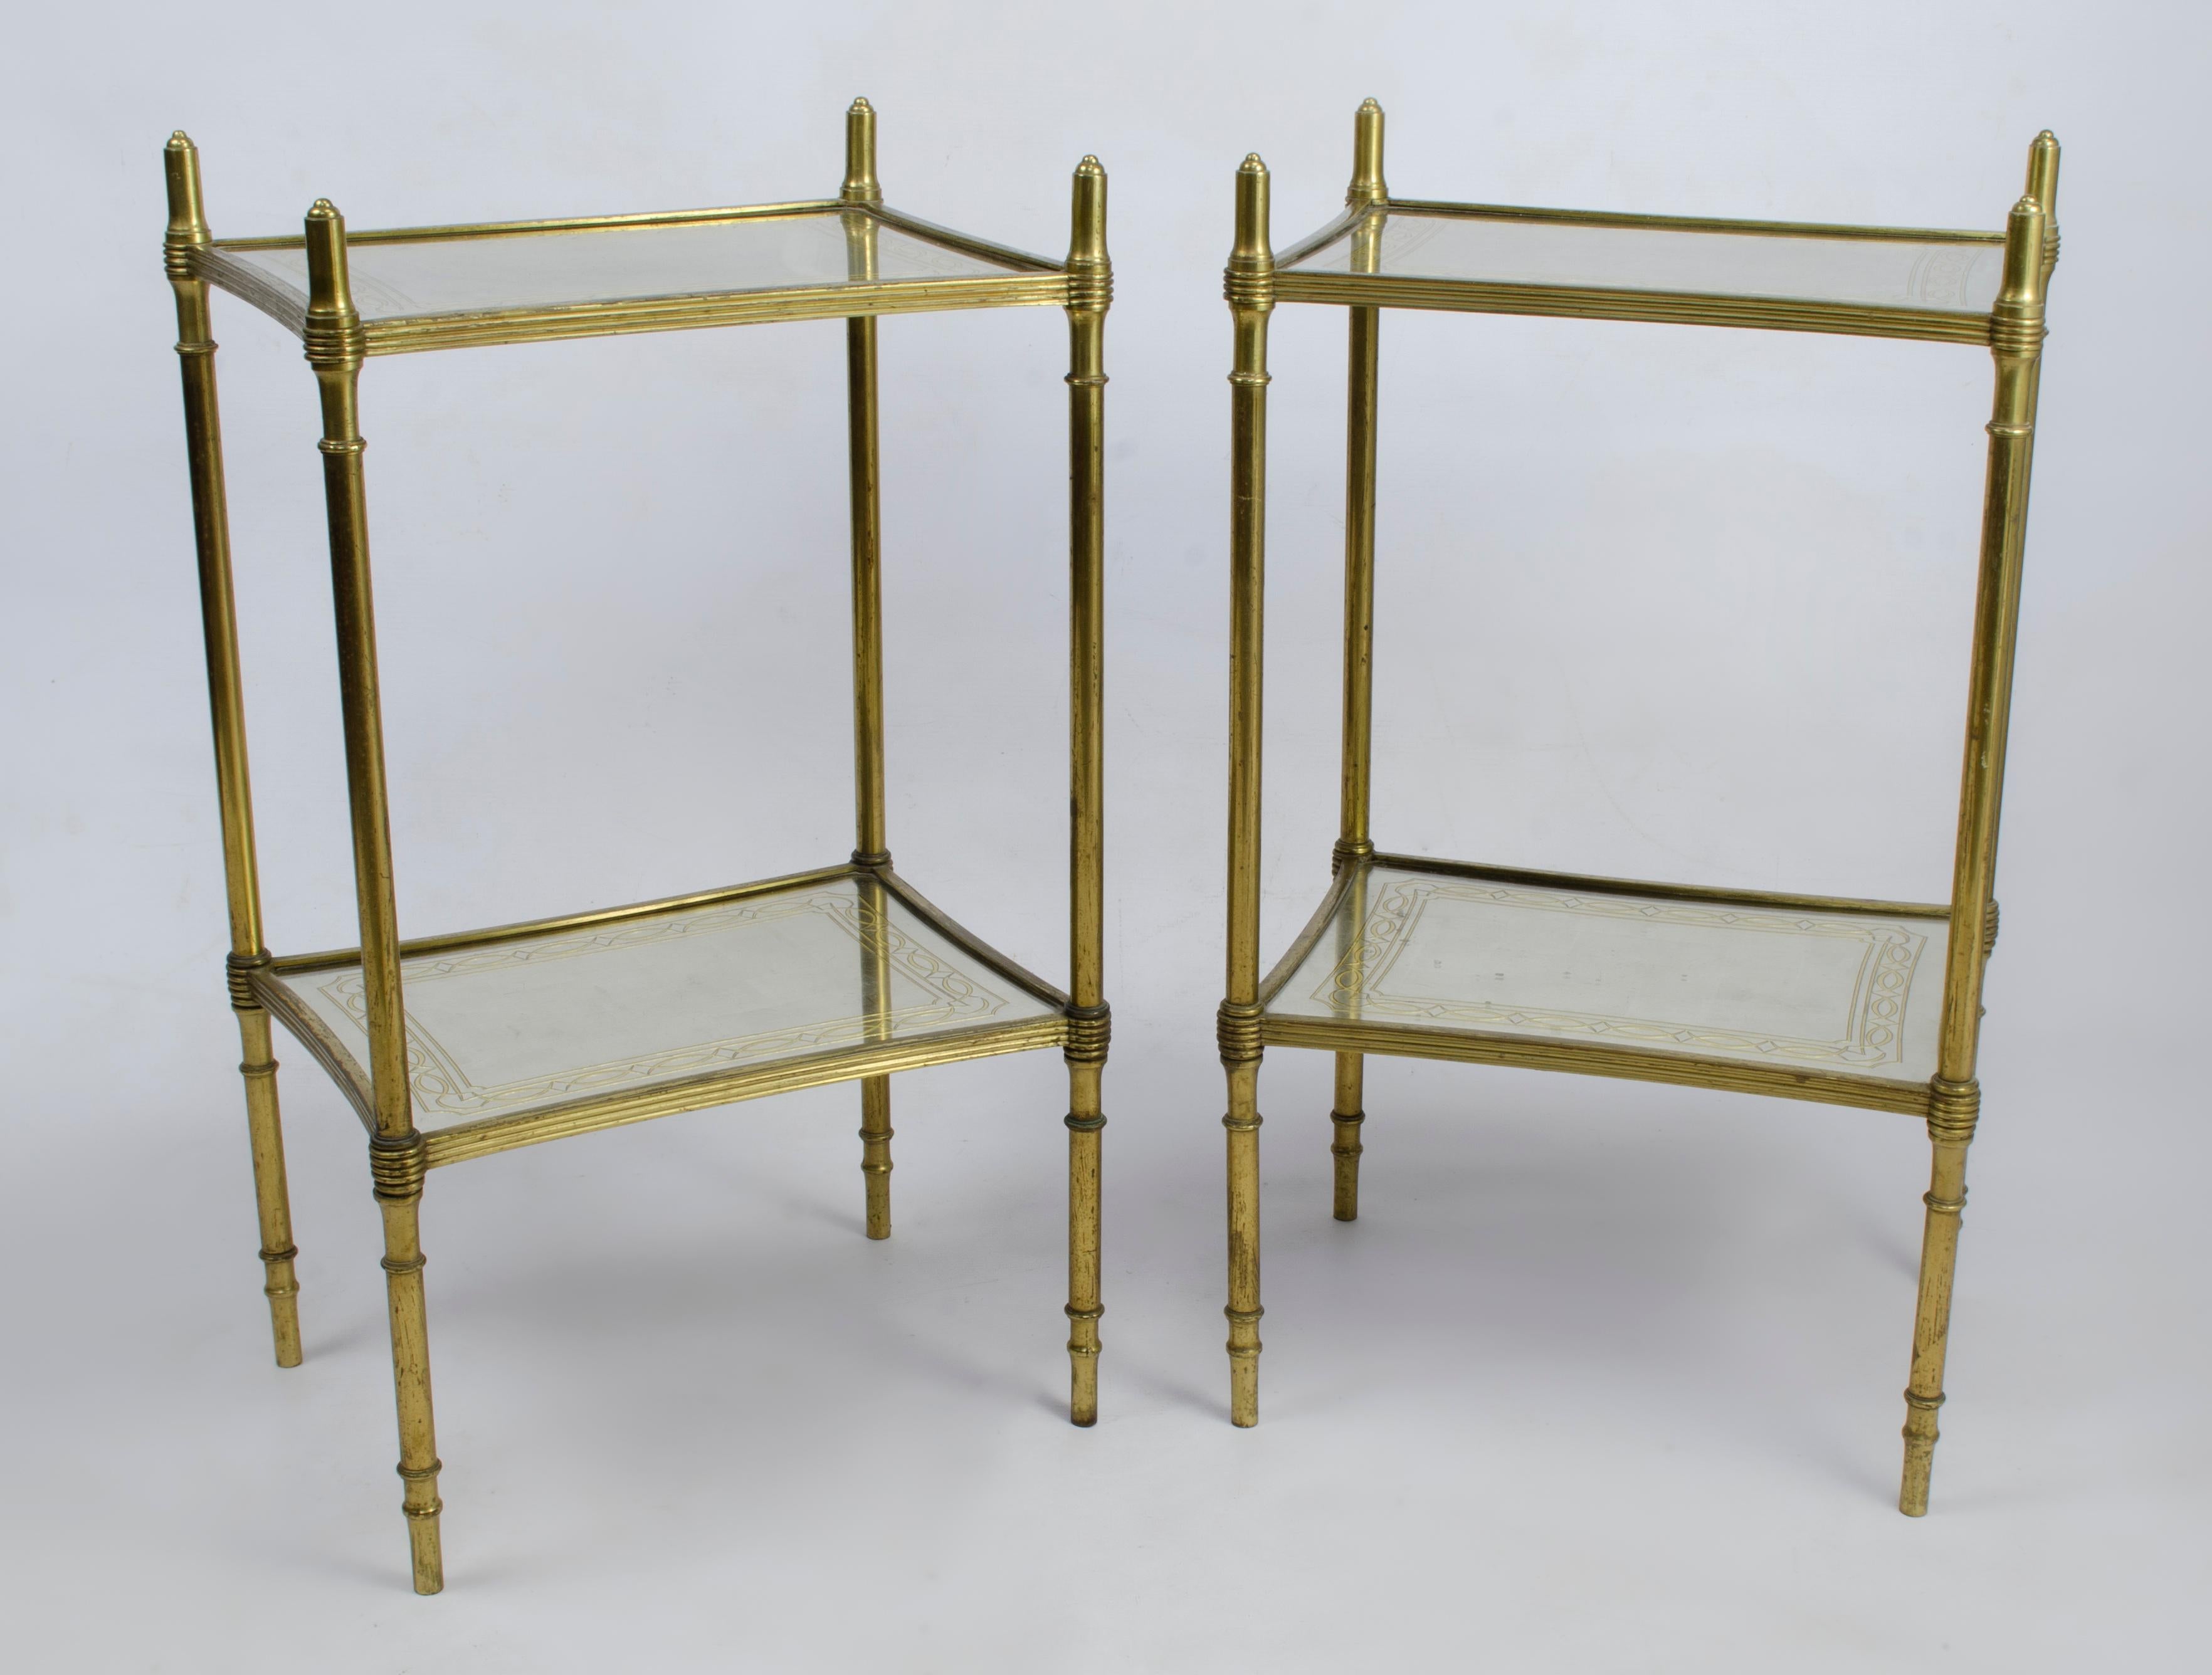 A Pair of very fine gilt-bronze and silver and gold leaf Églomisé Two Tiers Side Tables. Probably Maison Jansen. Circa 1940.